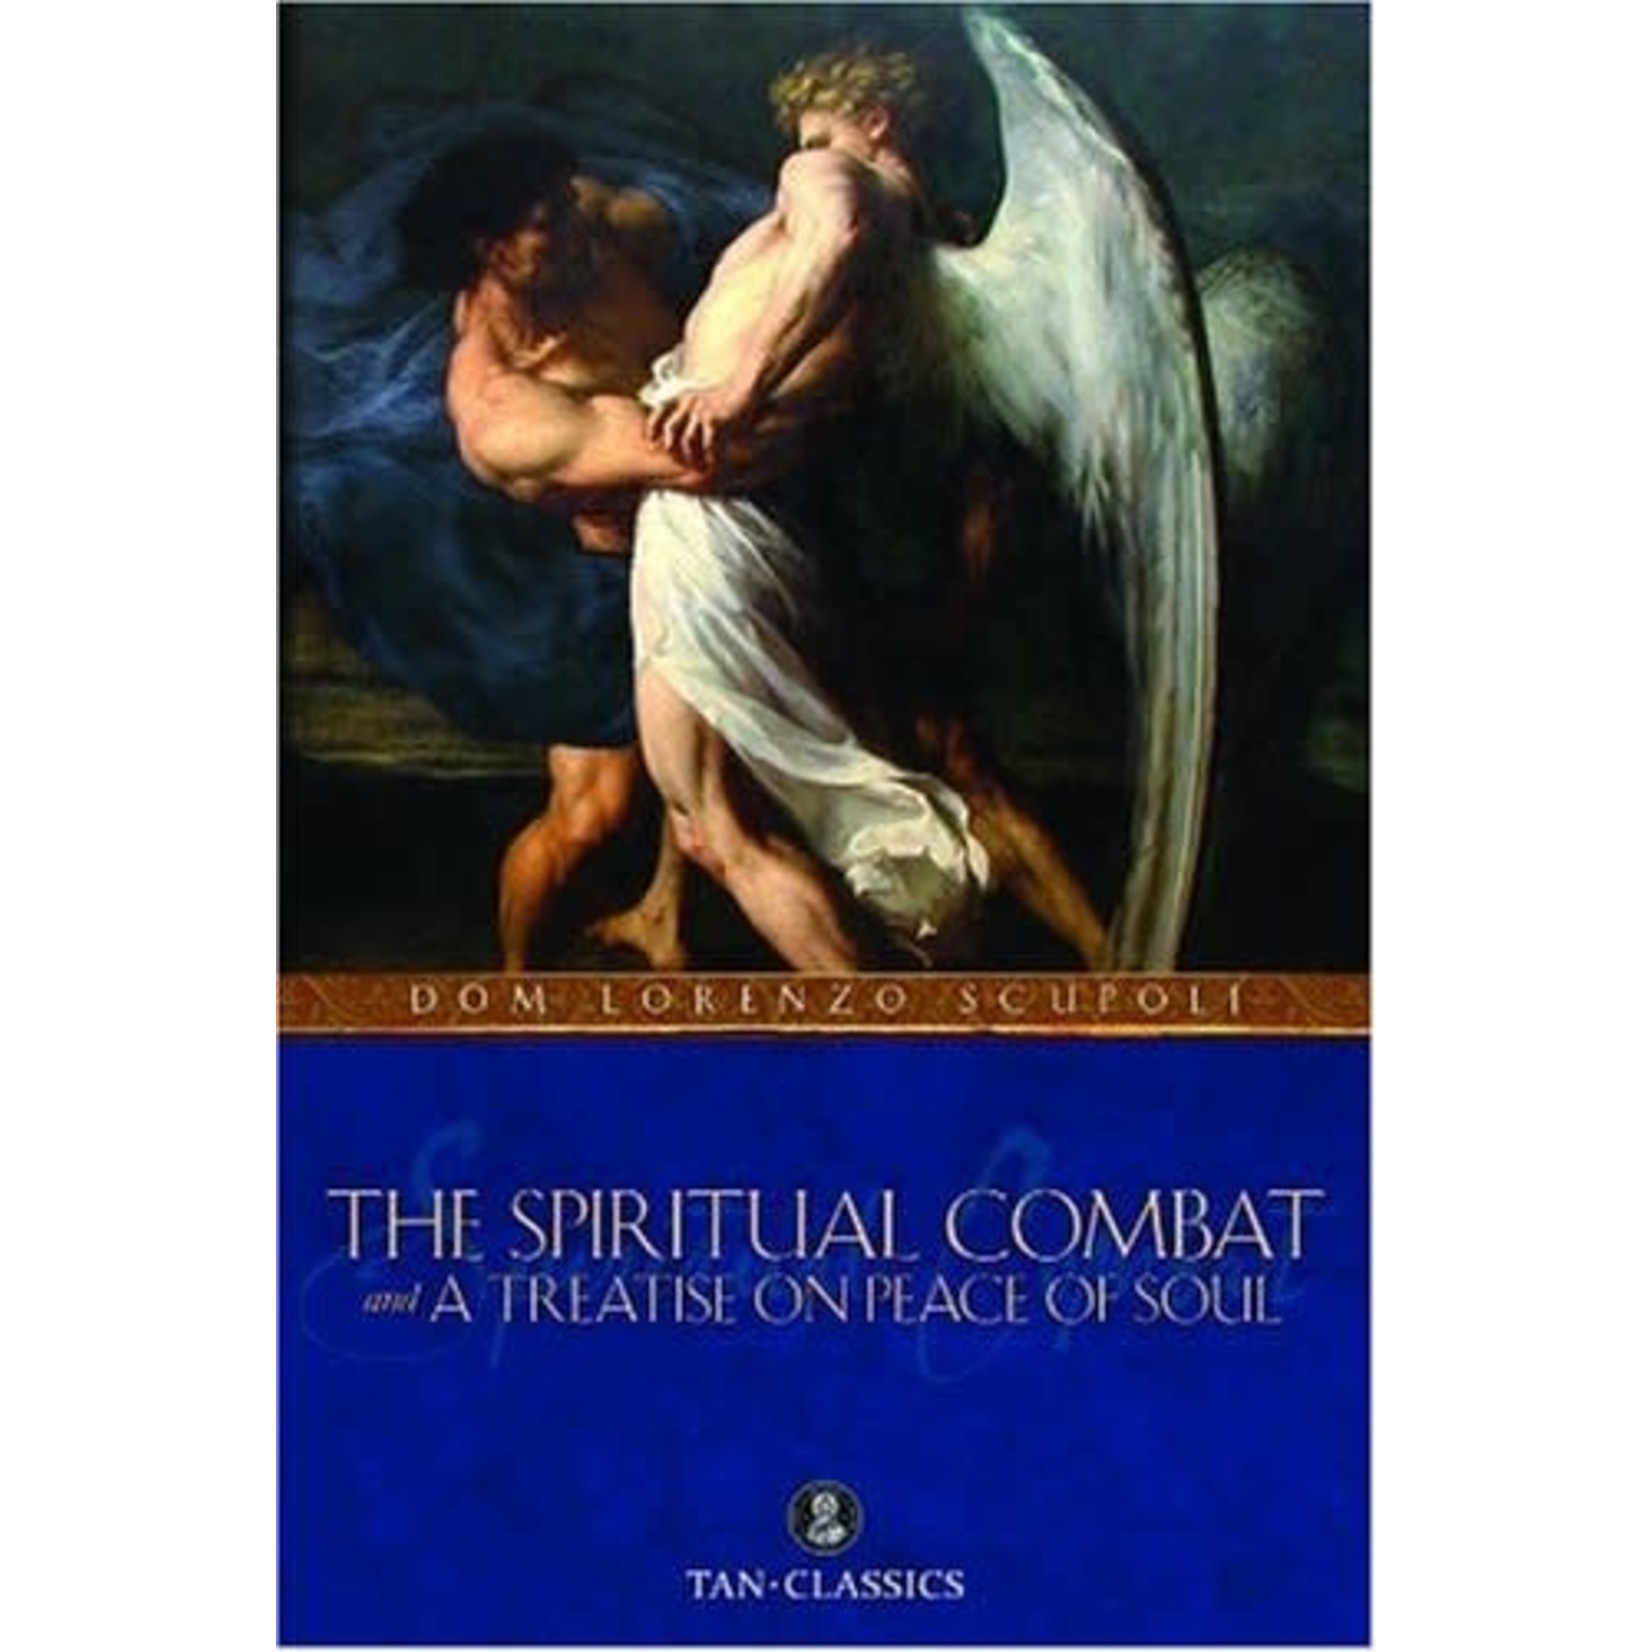 The Spiritual Combat and A Treatise on Peace of Soul